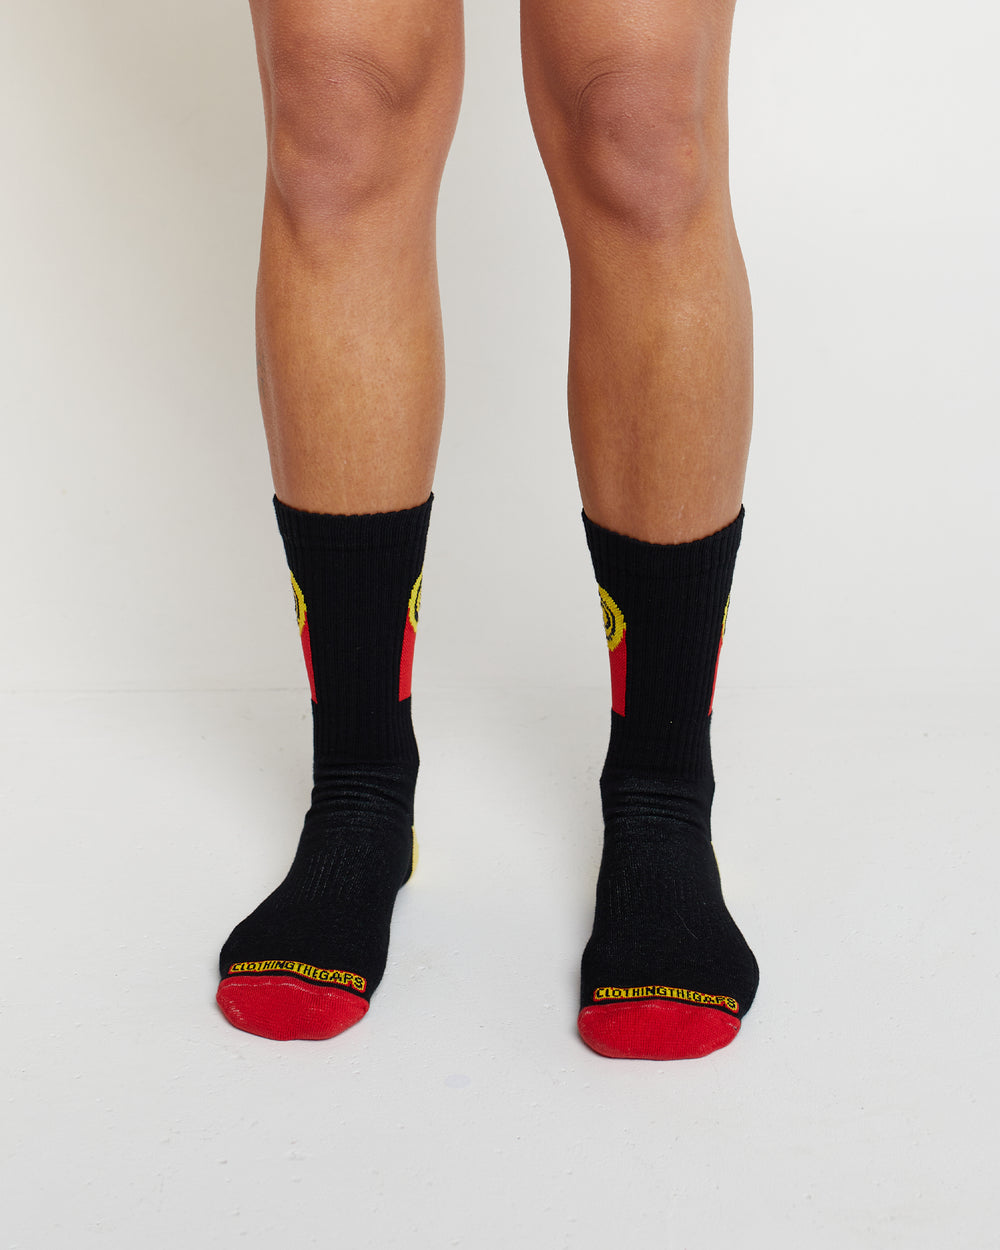 Clothing The Gaps. Flag Rights Socks. Long black socks with rectangle strips going down on both sides of socks representing the Clothing The Gaps logo and Aboriginal flag .With black at the top yellow circle in the middle with 2 black circular rings inside and red underneath the yellow. On both sides of each sock. Yellow on heel of socks. Red on toes of socks. Clothing The Gaps written above red section just going over toes.